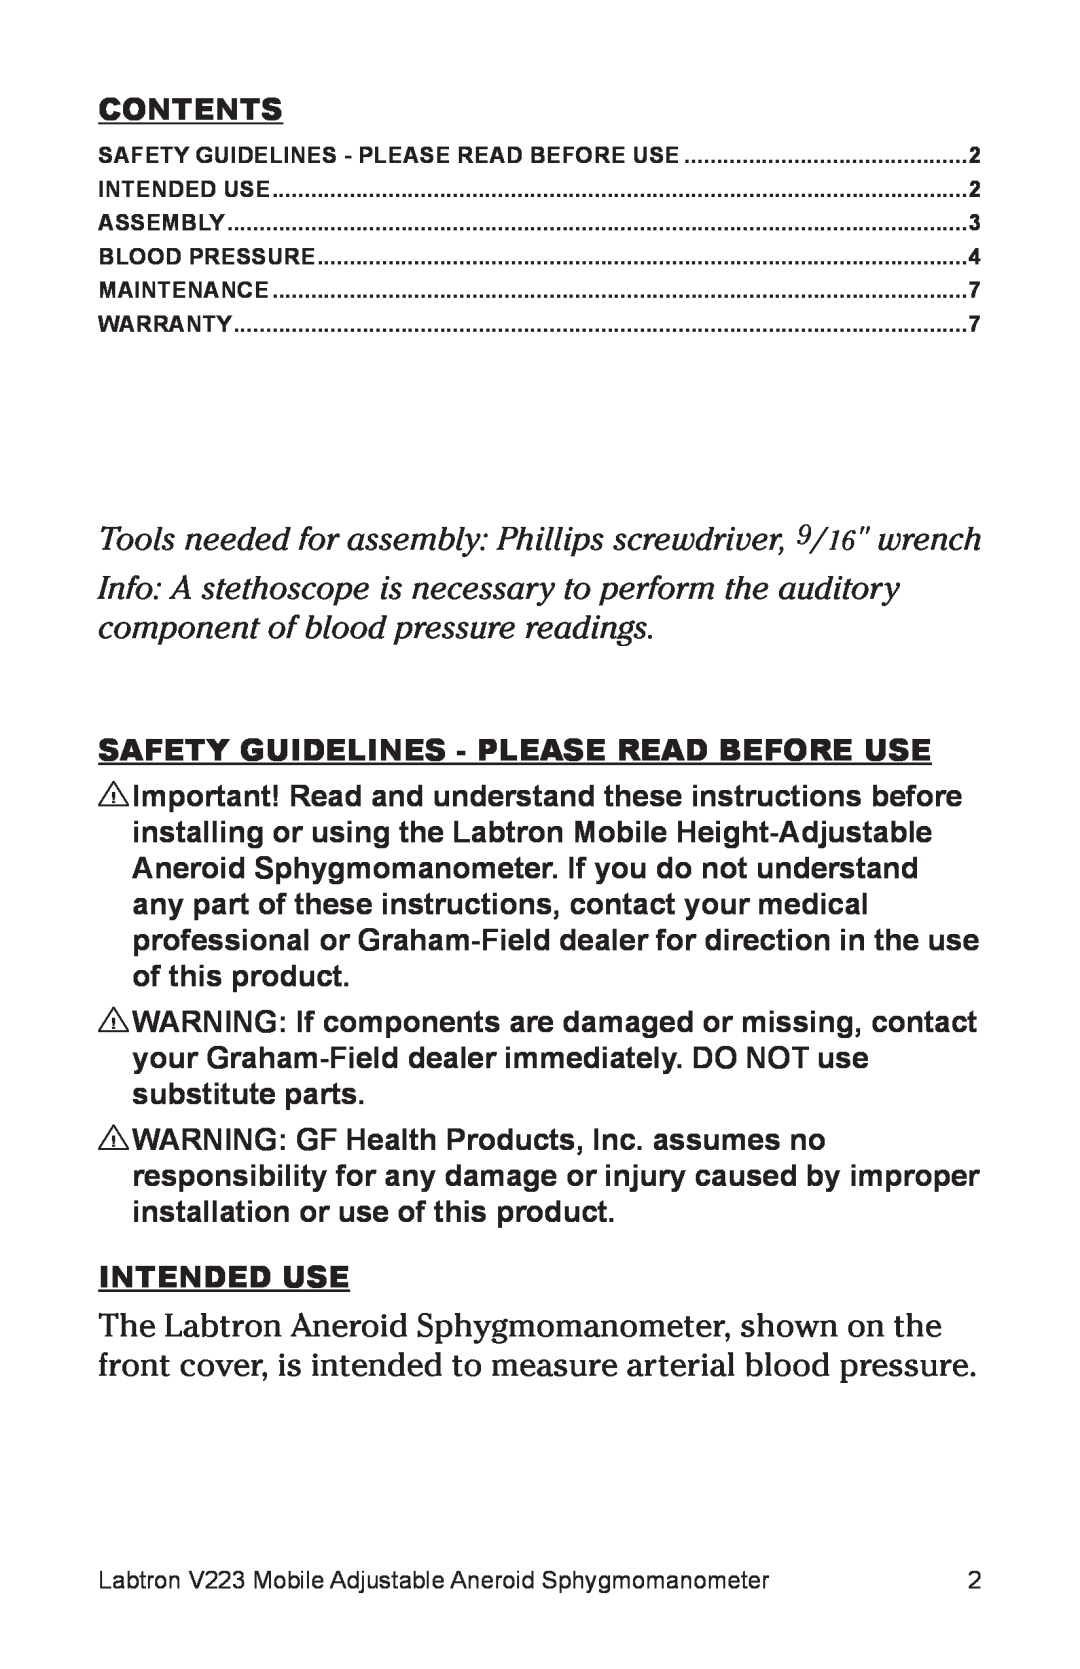 Graham Field V223 user manual Tools needed for assembly Phillips screwdriver, 9/16 wrench, Contents, Intended Use 